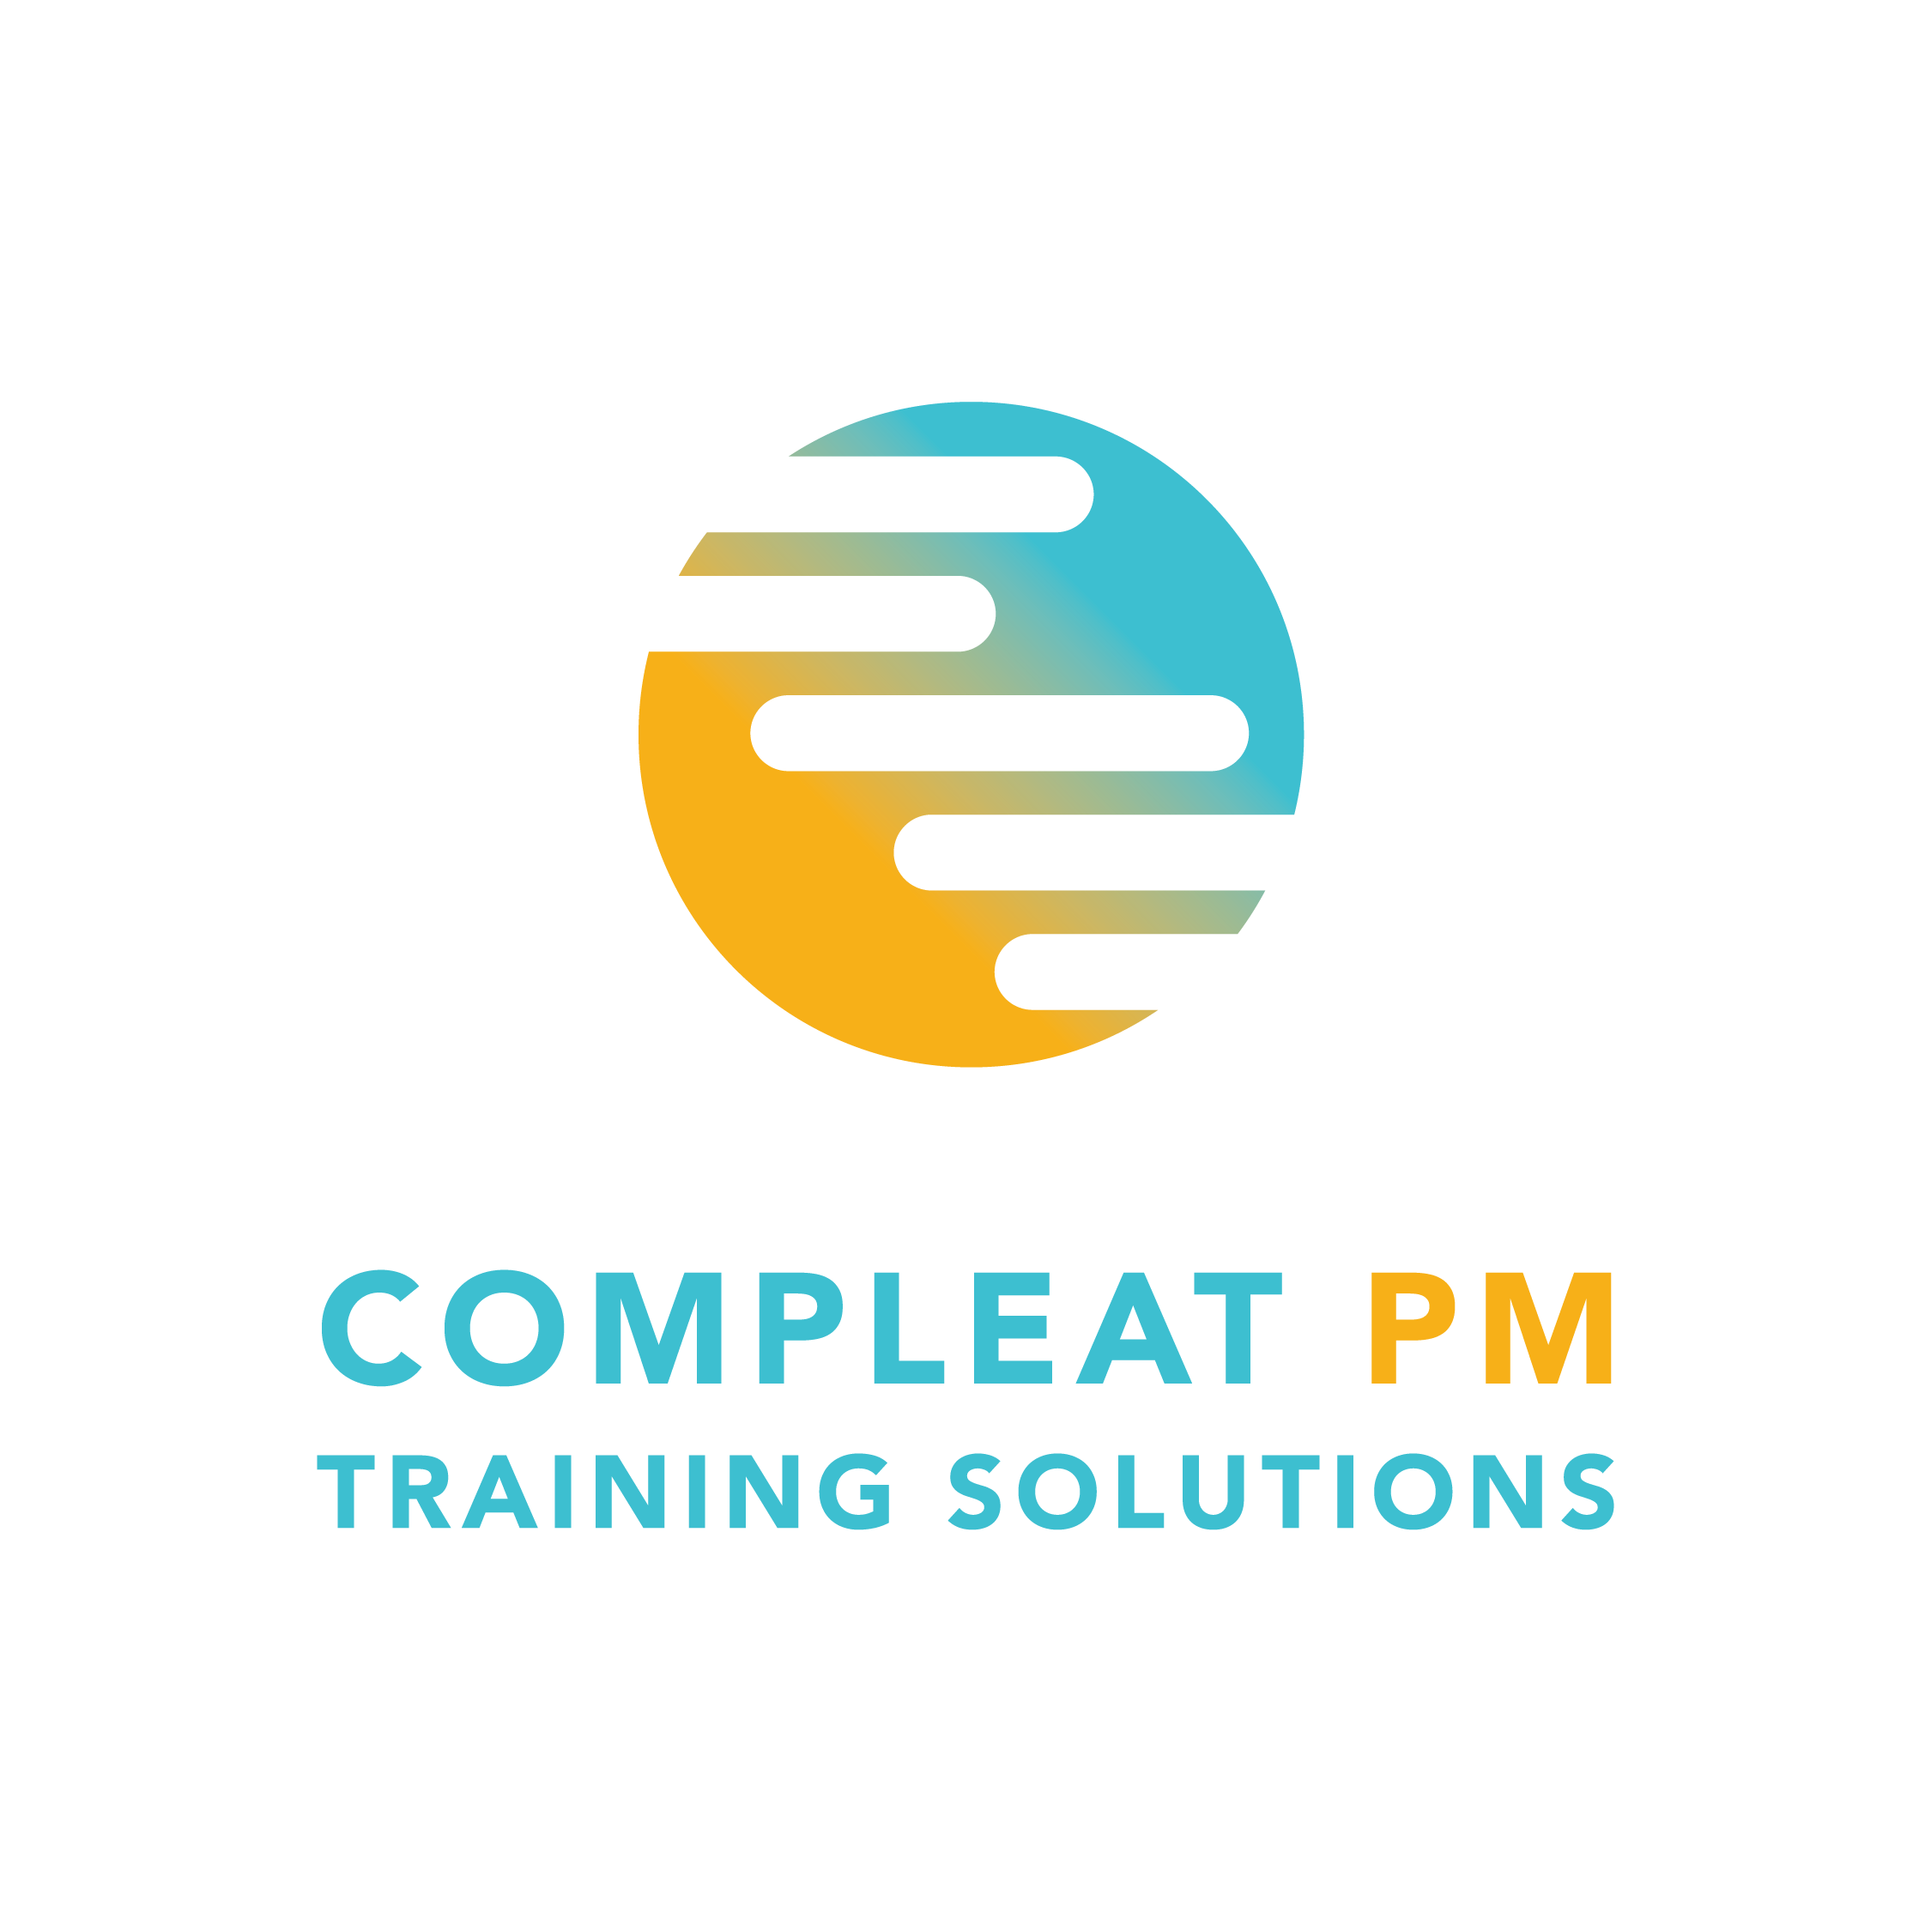 Compleat PM Training Solutions